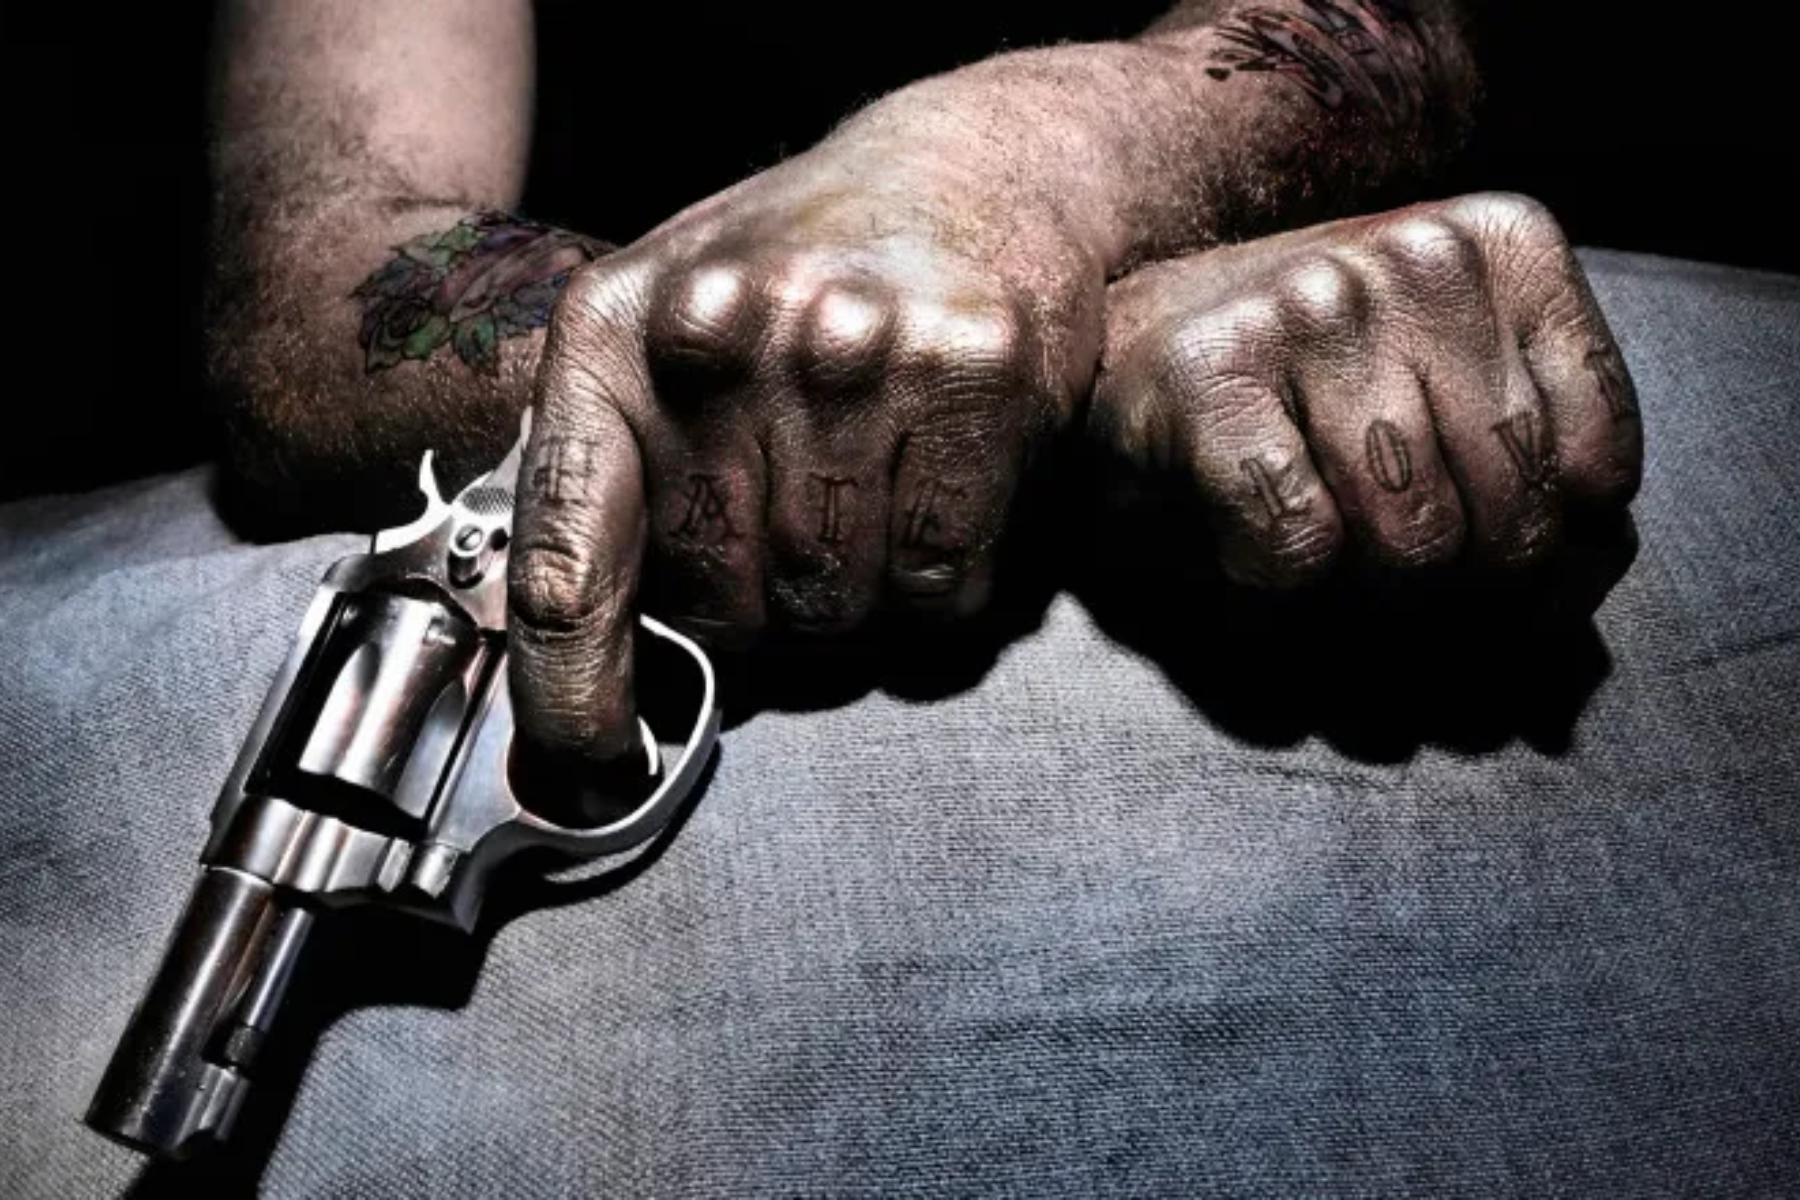 A tattooed man with a pistol crosses his arm